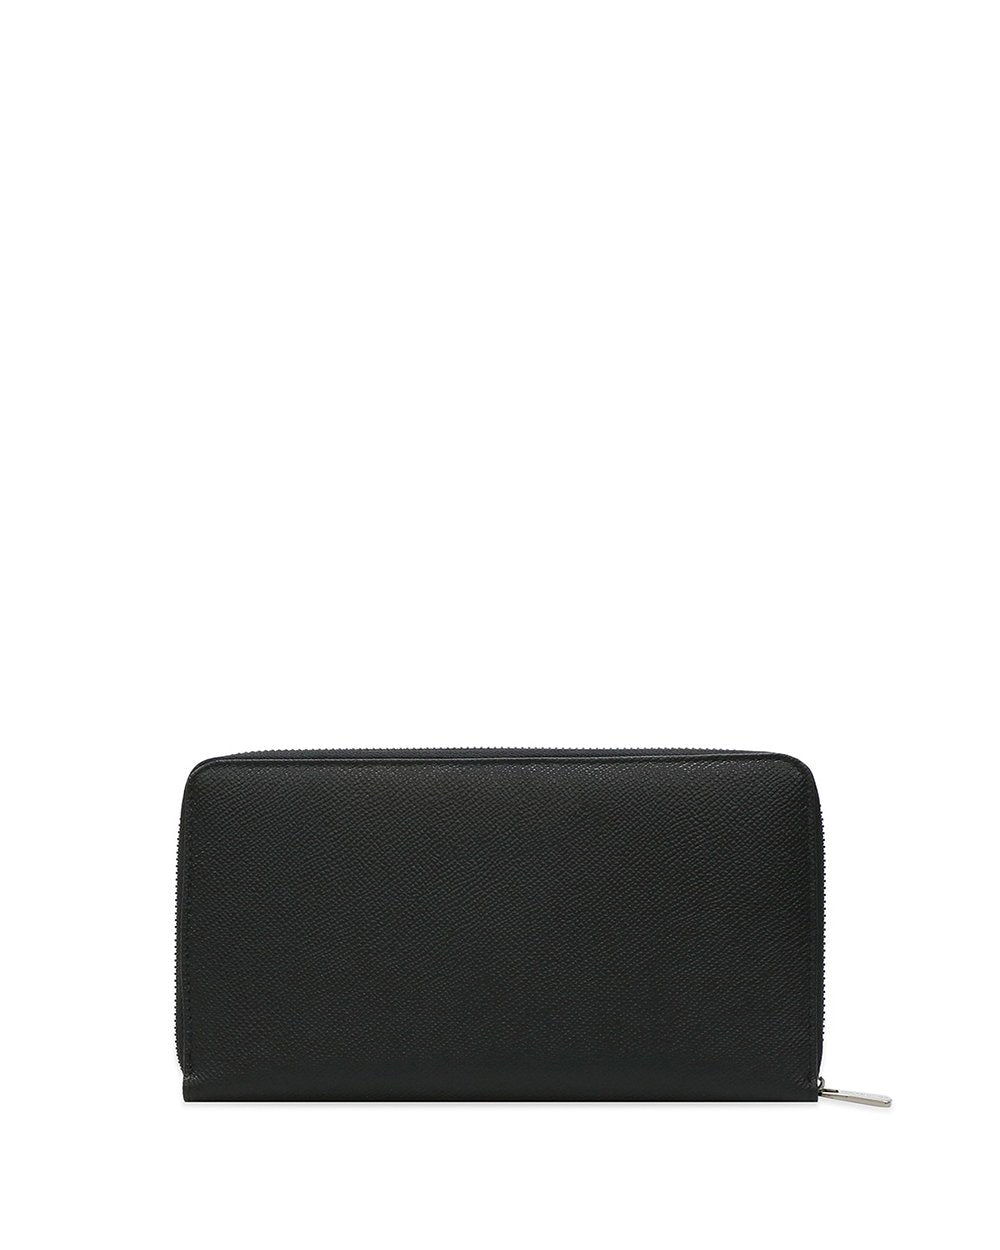 Hammered Leather Long Wallet - ISSI Outlet